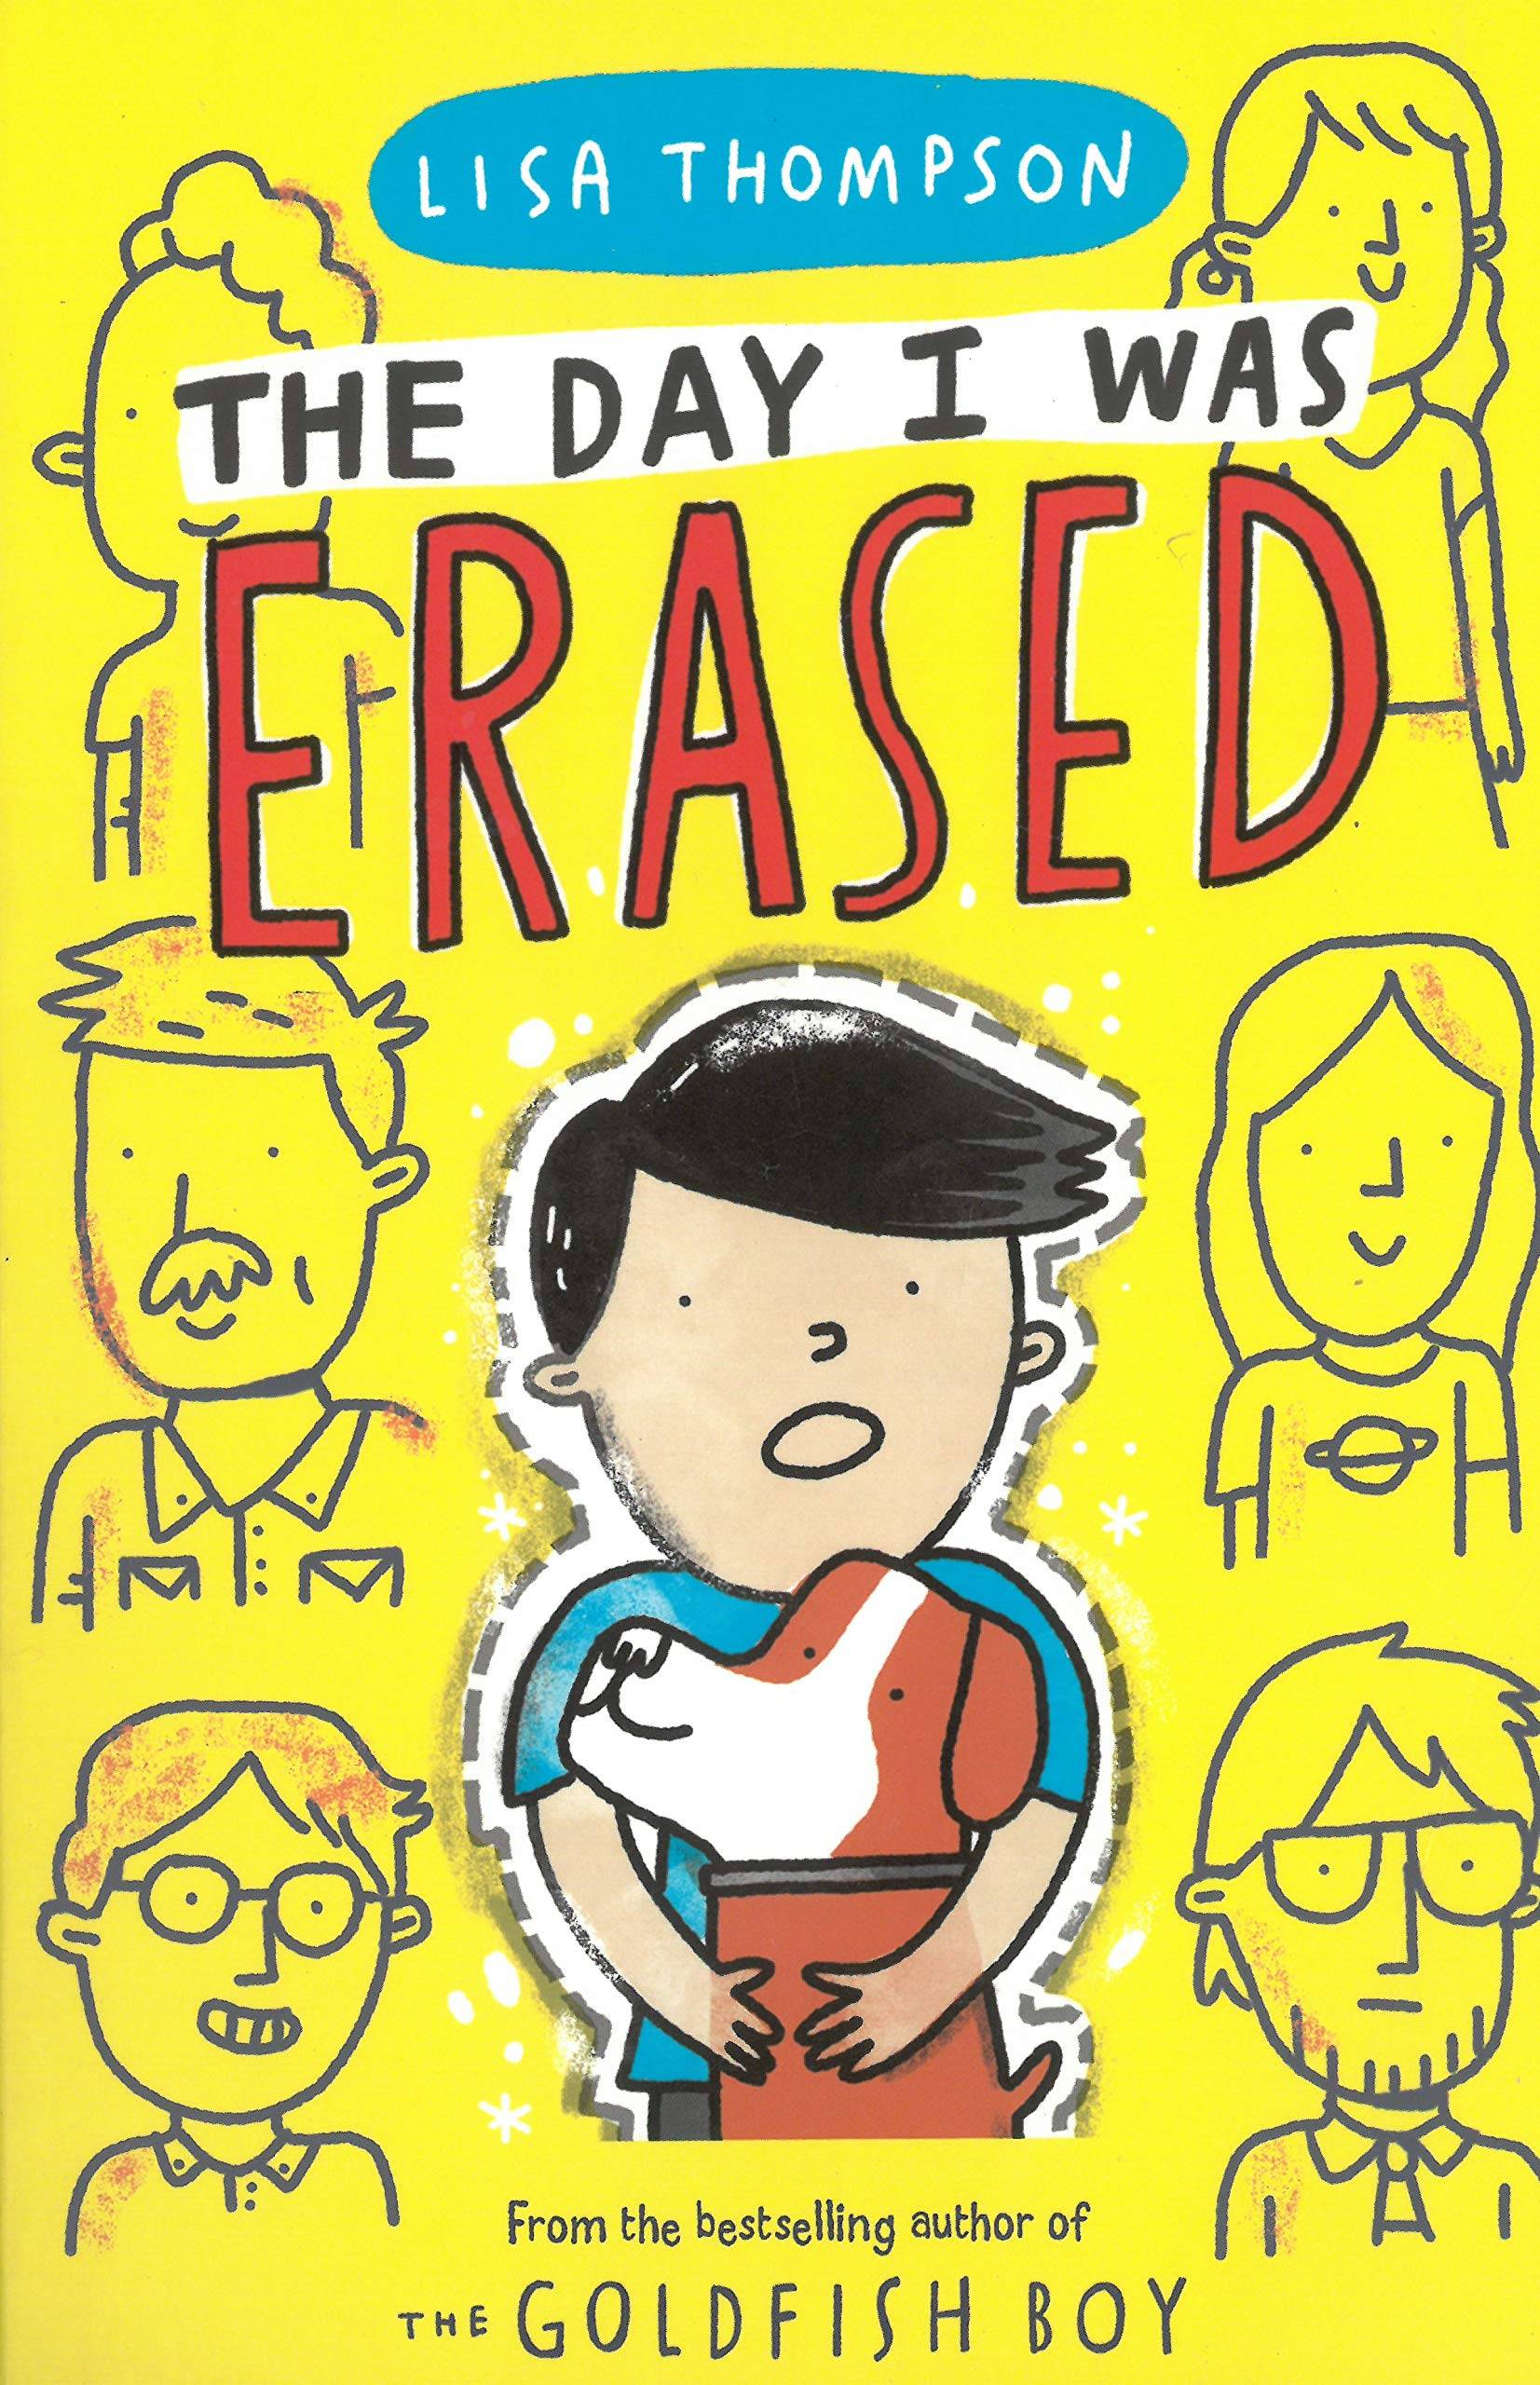 IMG : The day I was Erased